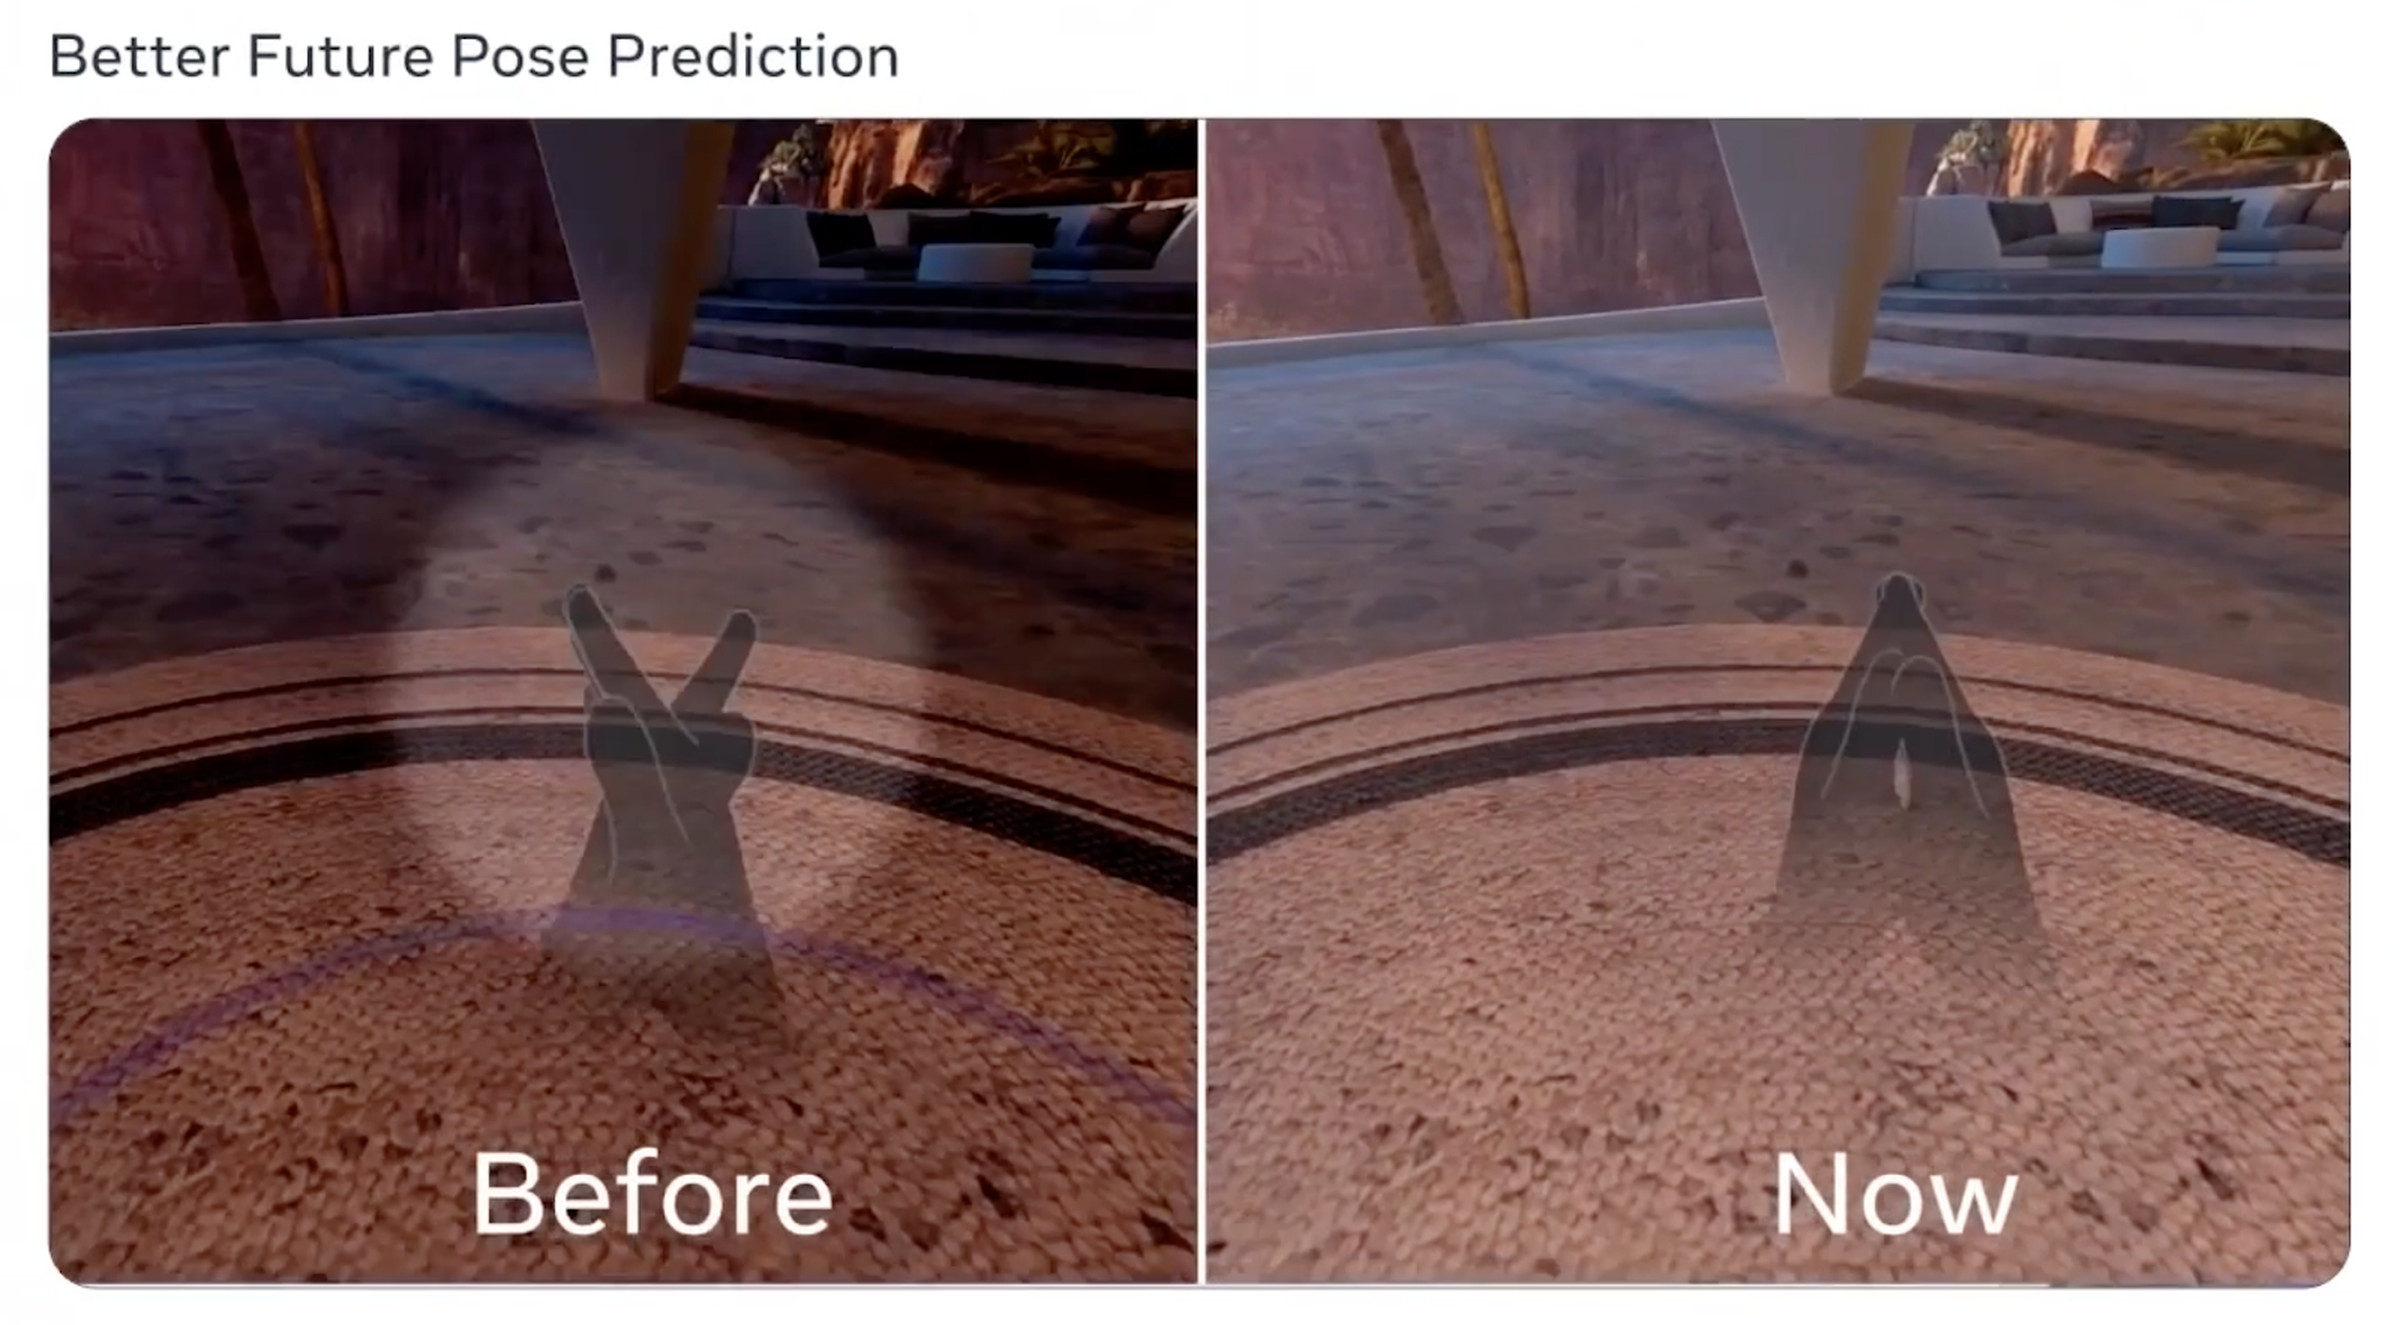 Two screenshots from Meta of how Hand Tracking 2.1 can predict future hand positions.